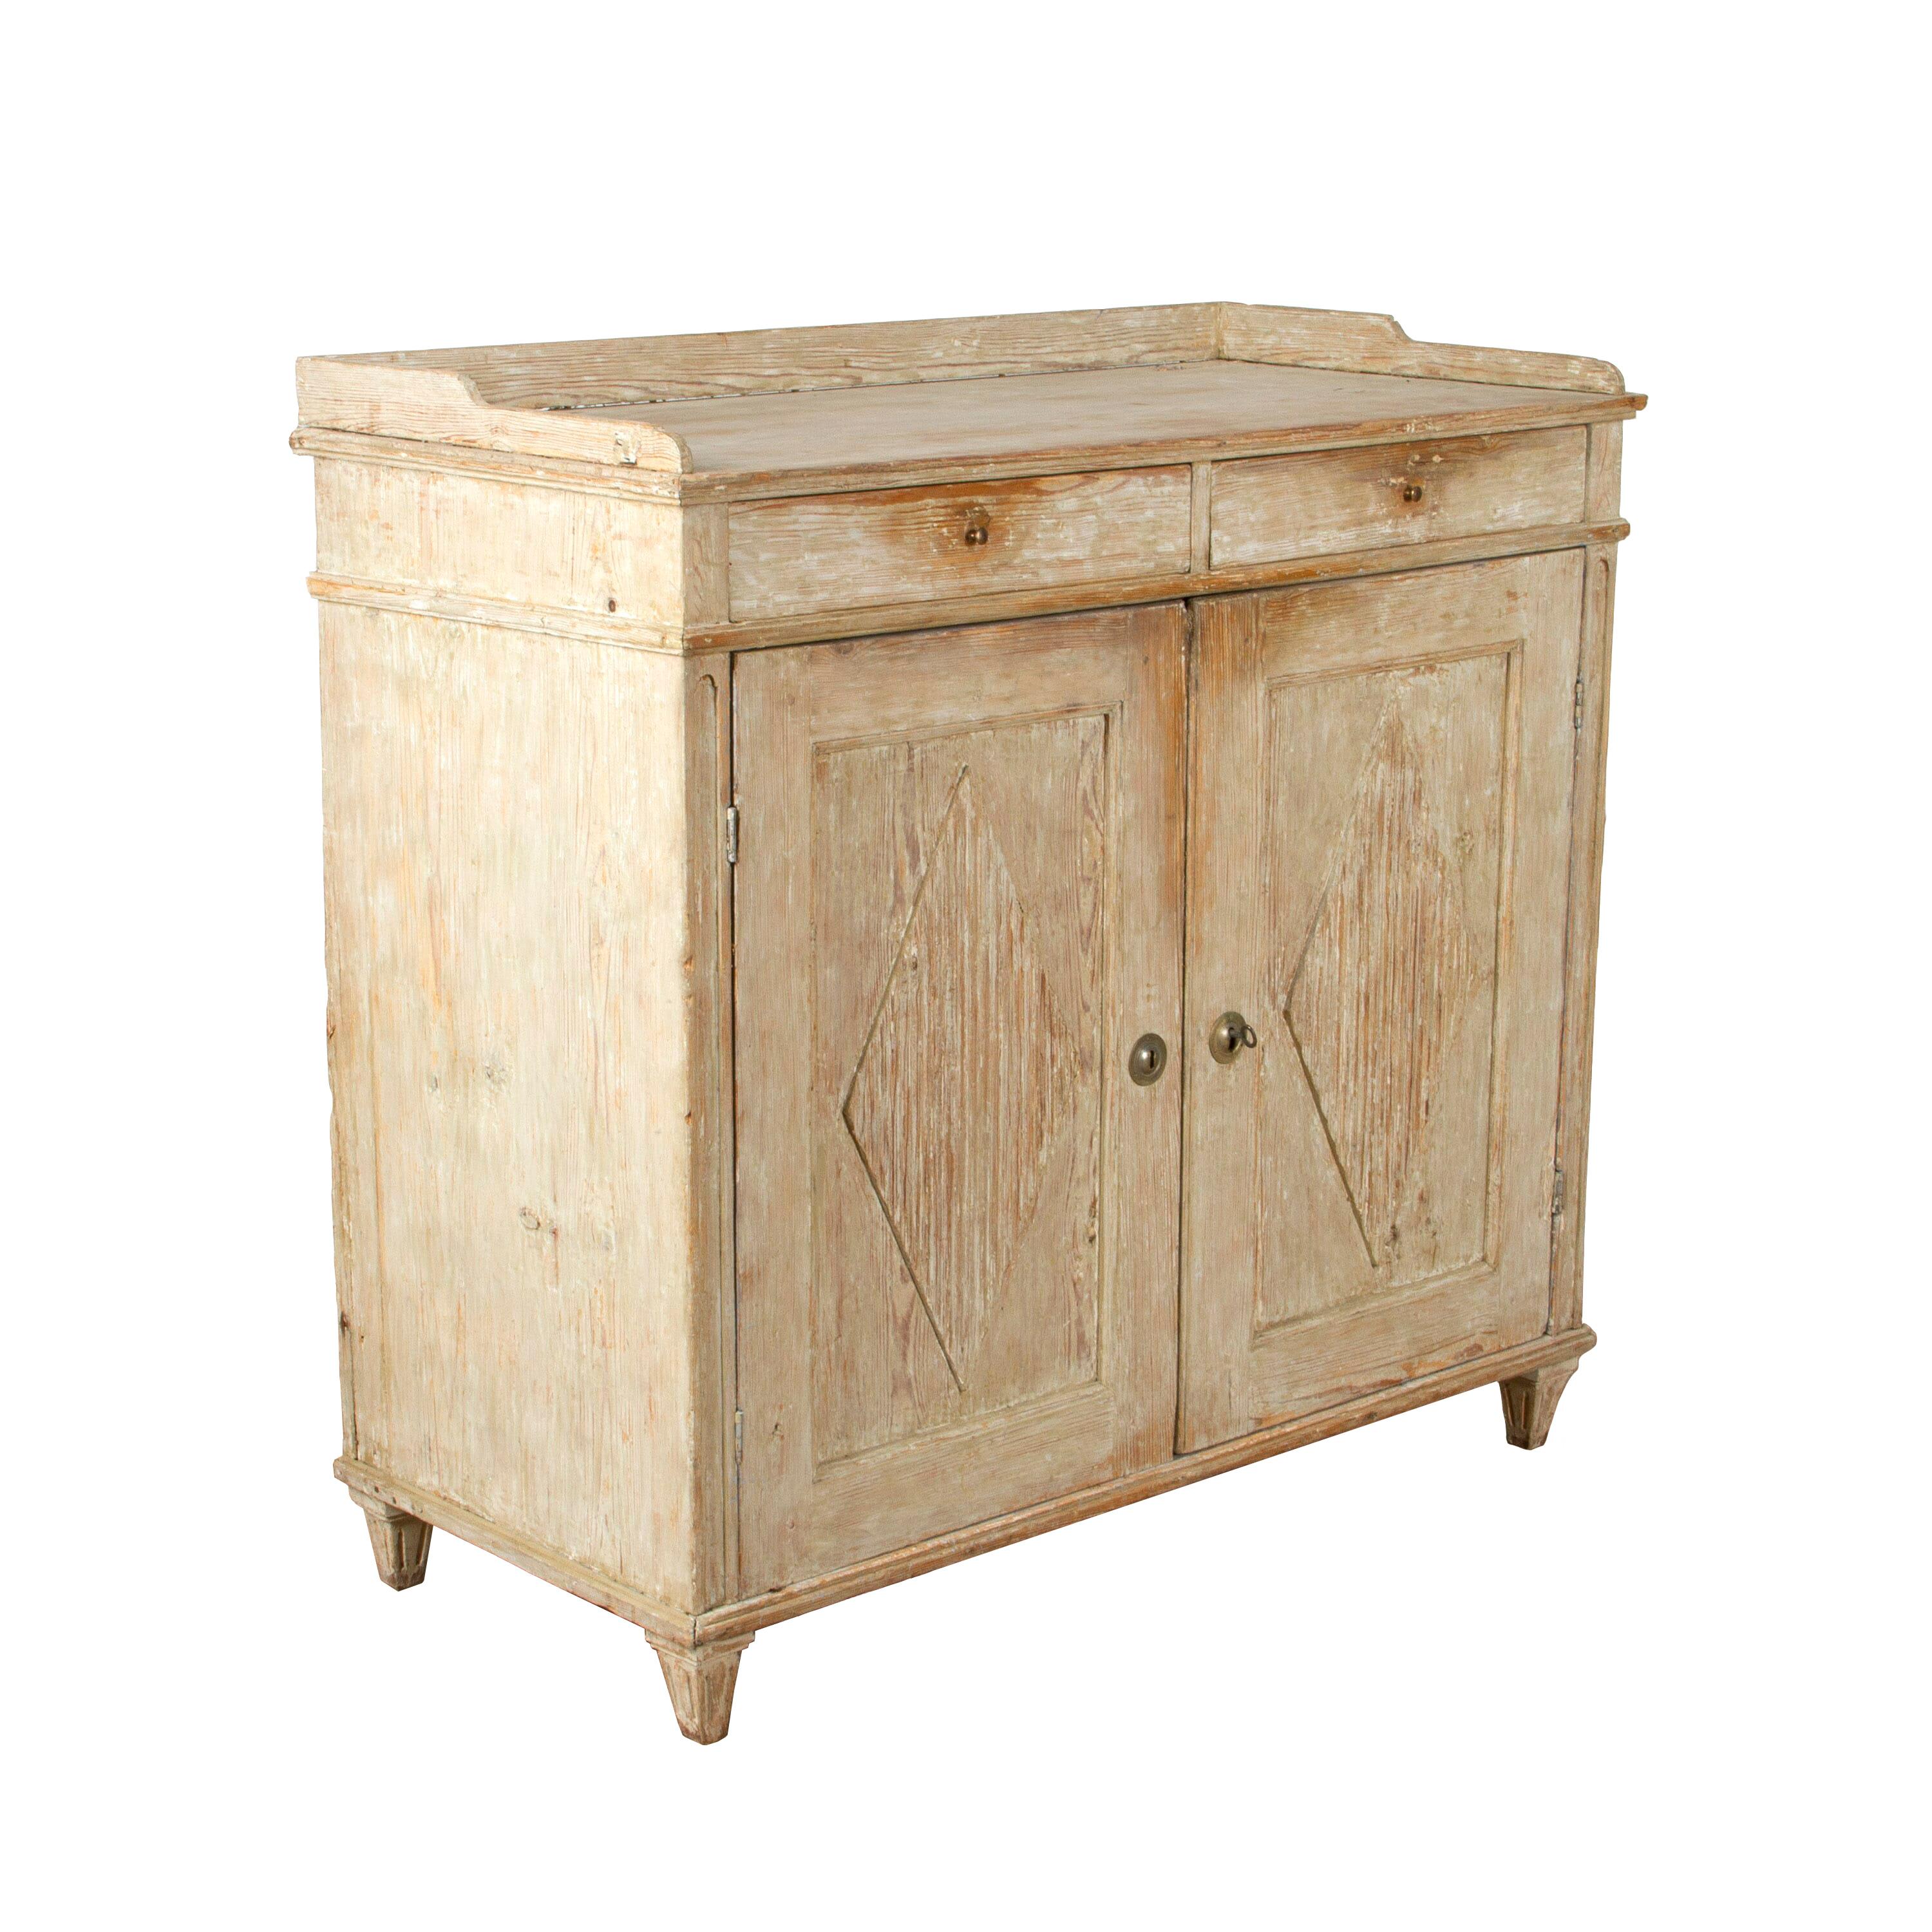 This buffet has a beautiful form. It has a lovely galleried top section that sits above two panelled doors which have a decorative ribbed, diamond design carved into each side. The two panelled doors open to reveal a single shelf that is supported